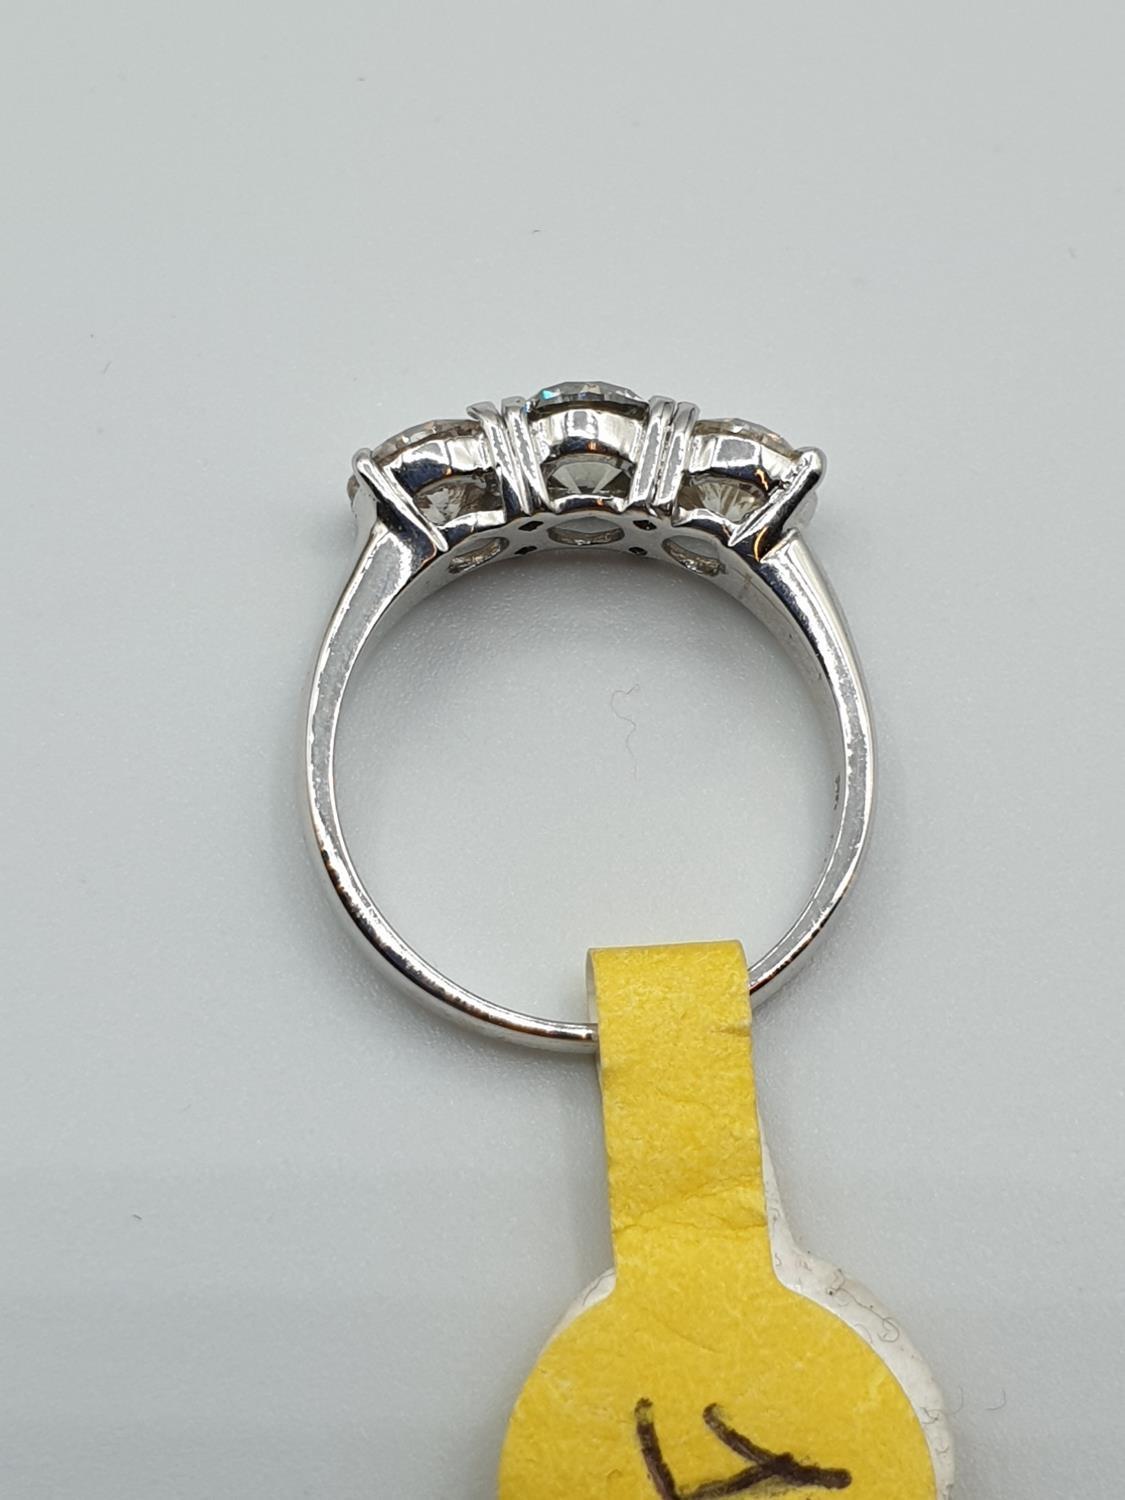 9ct white gold ring with 3 matching diamonds (1.7ct in total), size K and weight 5g - Image 6 of 6